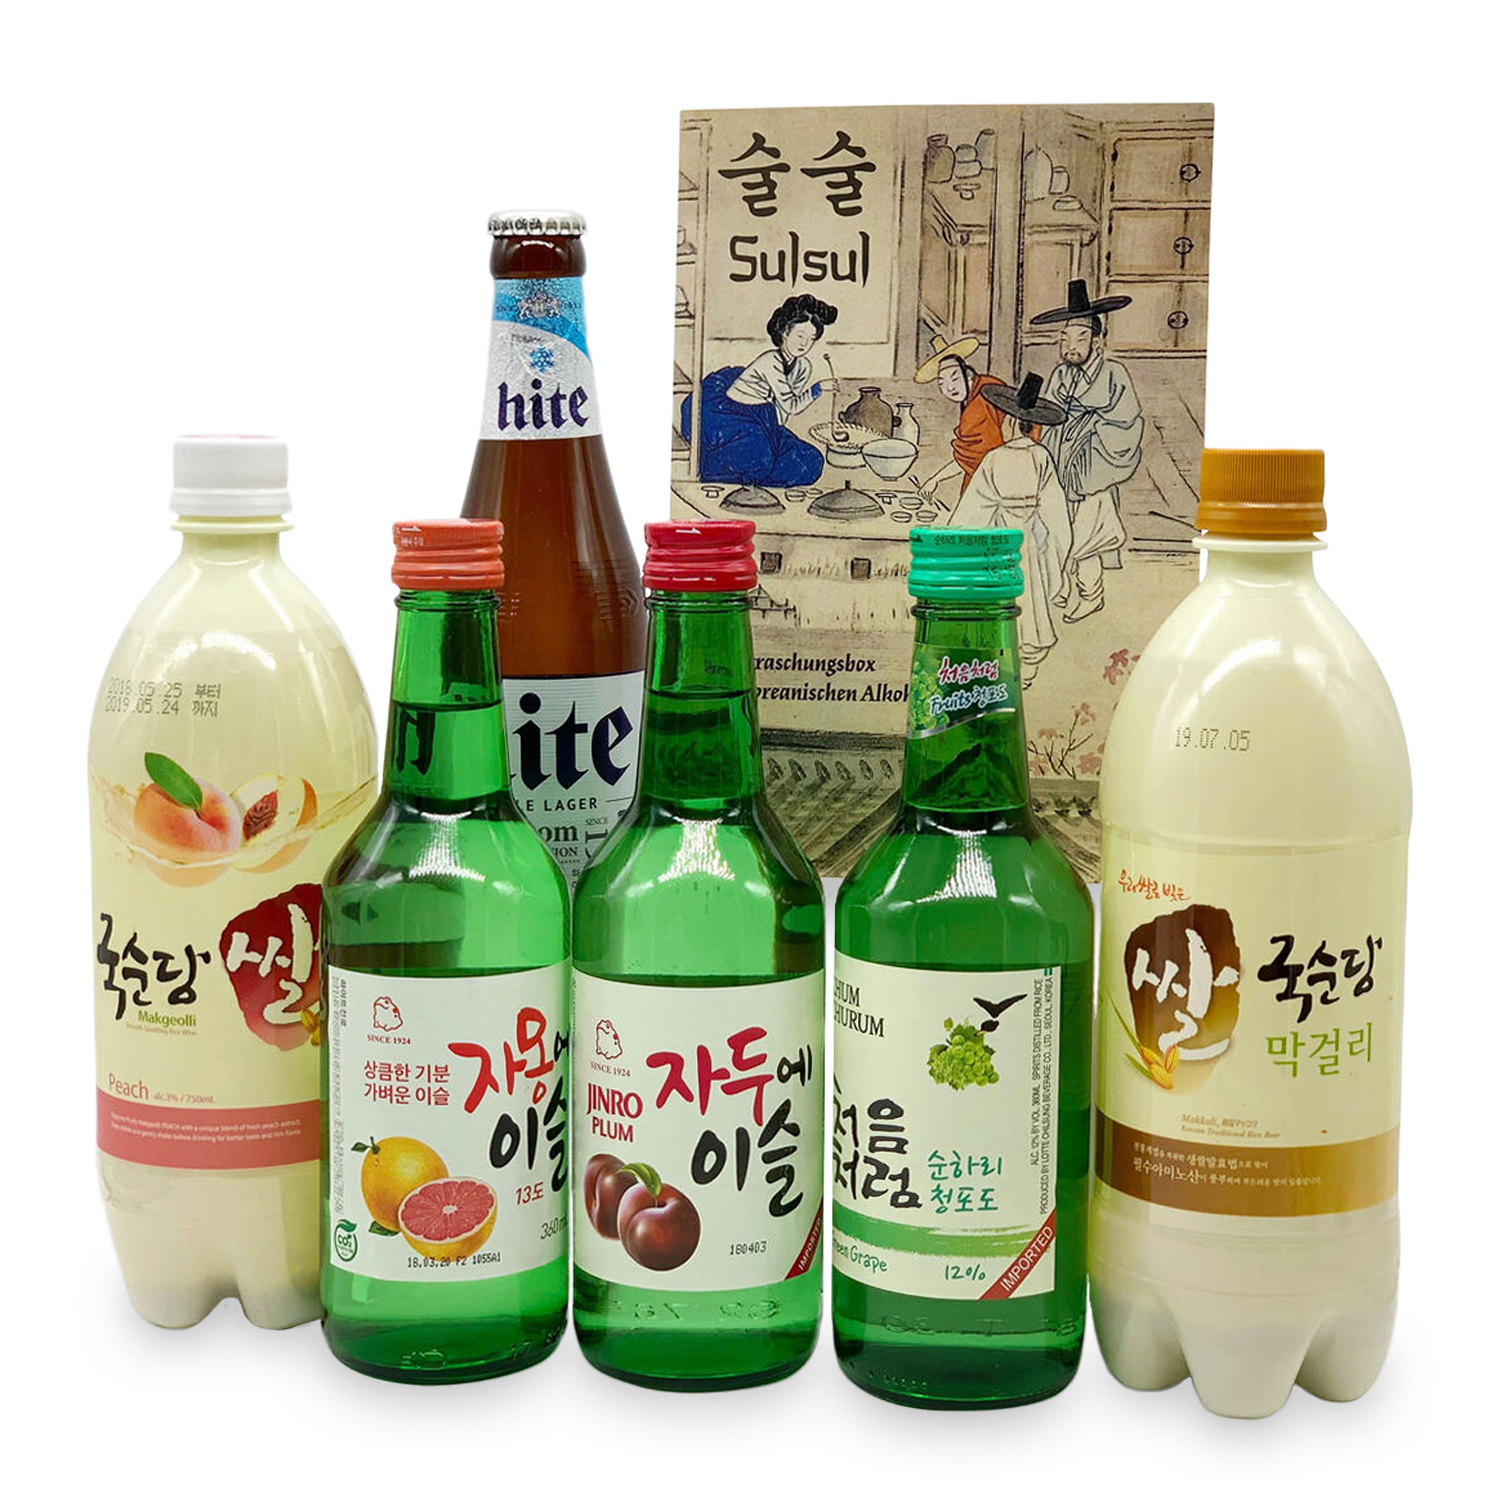 Sulsul: Surprise box with 6 alcoholic drinks from Korea